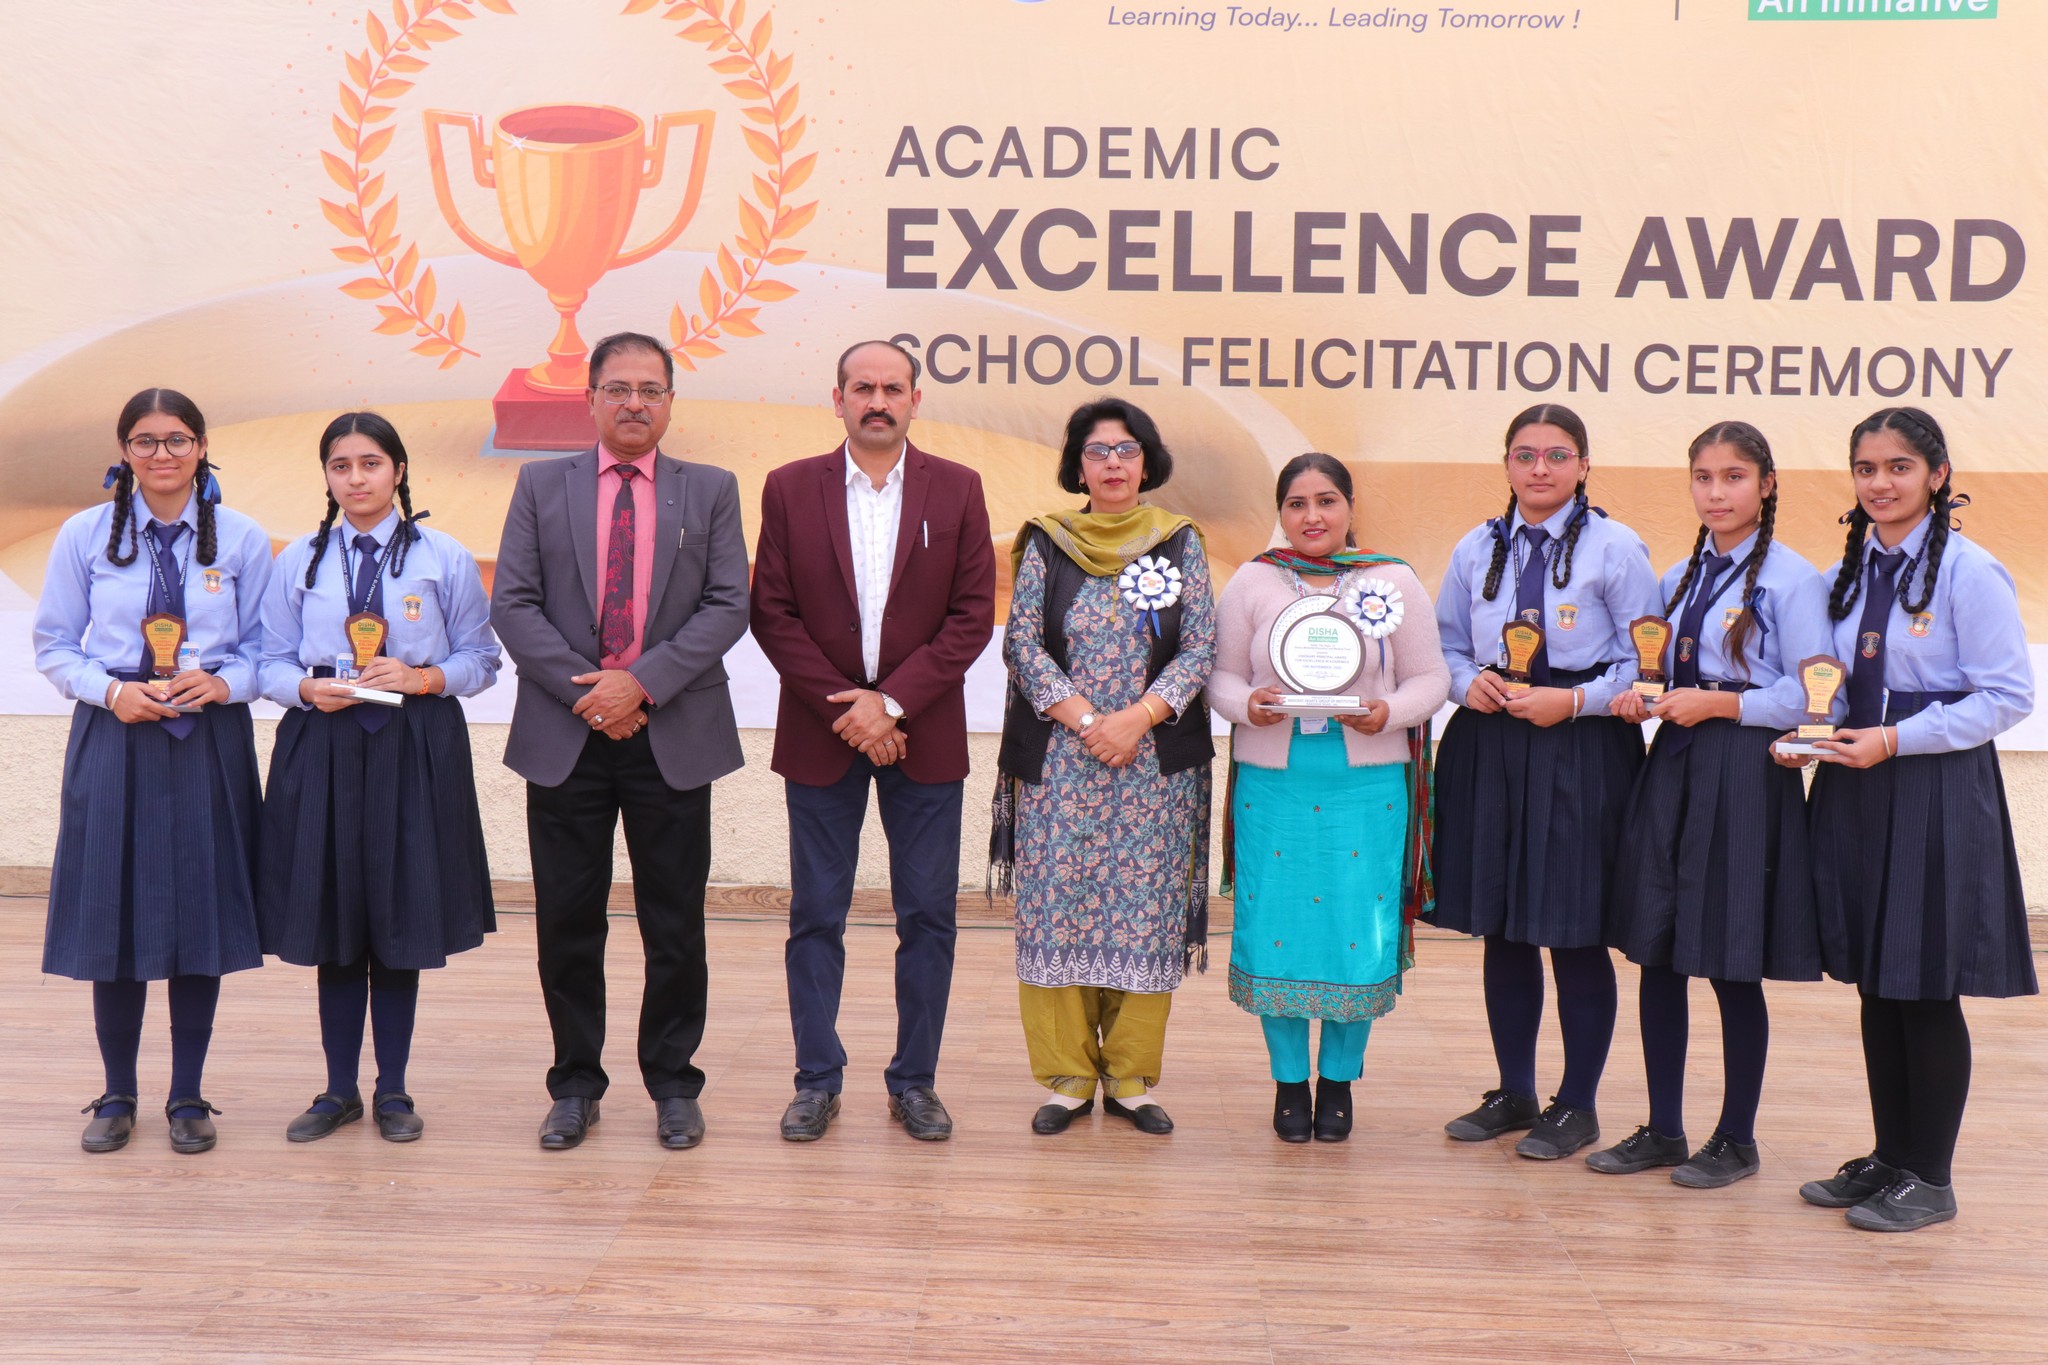 Bowry Memorial Educational & Medical Trust organized “Academic Excellence Award Ceremony” under DISHA - An Initiative